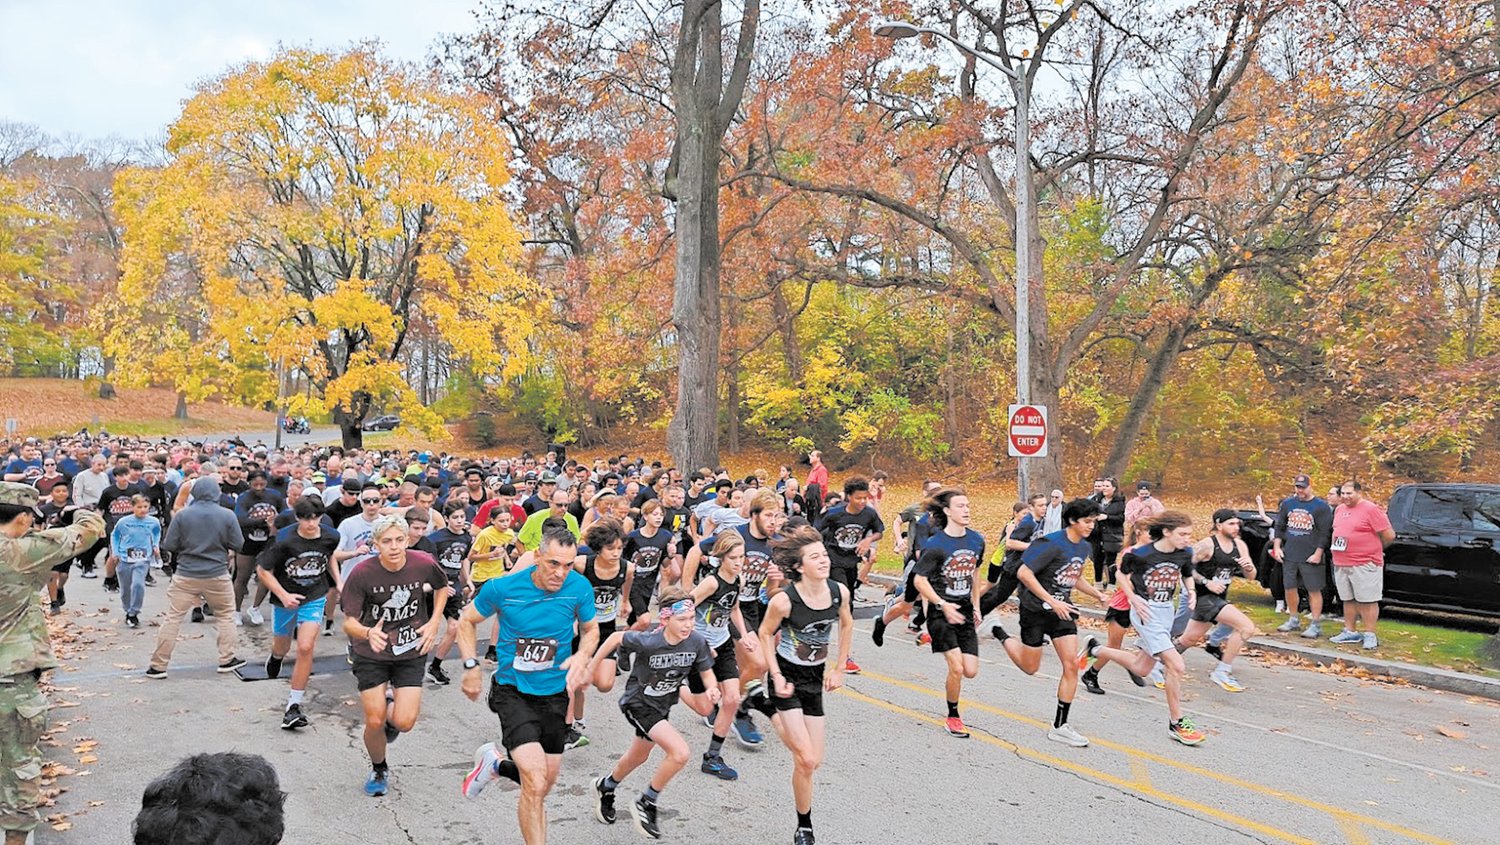 ON YOUR MARK: The racers take off running as the 9th Annual Park View 5k begins. The event benefits Operation Stand Down Rhode Island, an organization based in Johnston. (Photos courtesy of Cranston Public Schools)